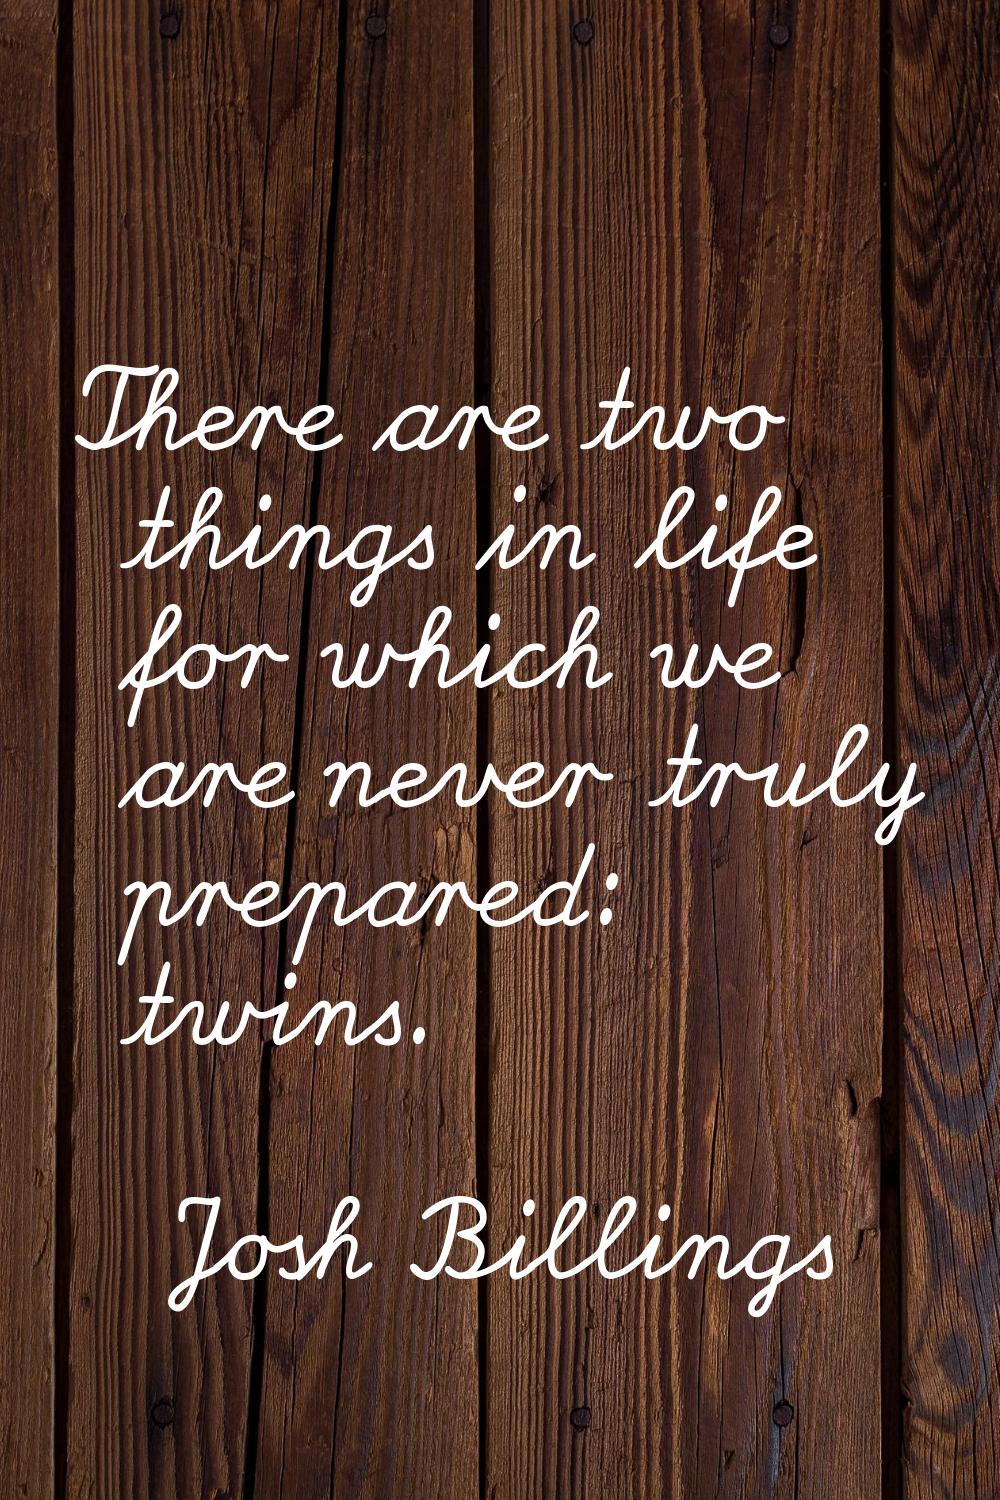 There are two things in life for which we are never truly prepared: twins.